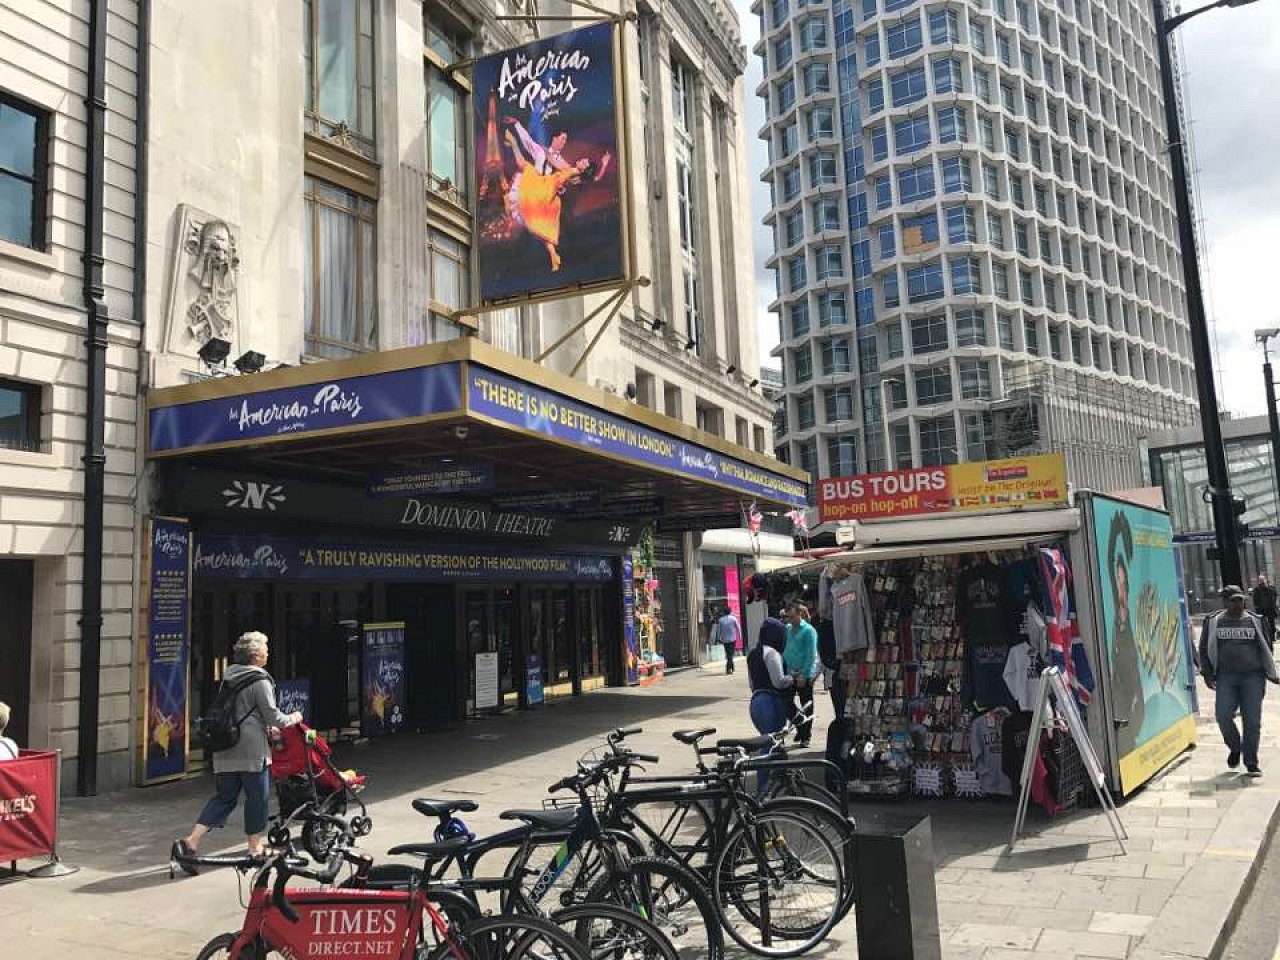 New LED digital screen for Dominion Theatre – Archers, Sign Makers, London